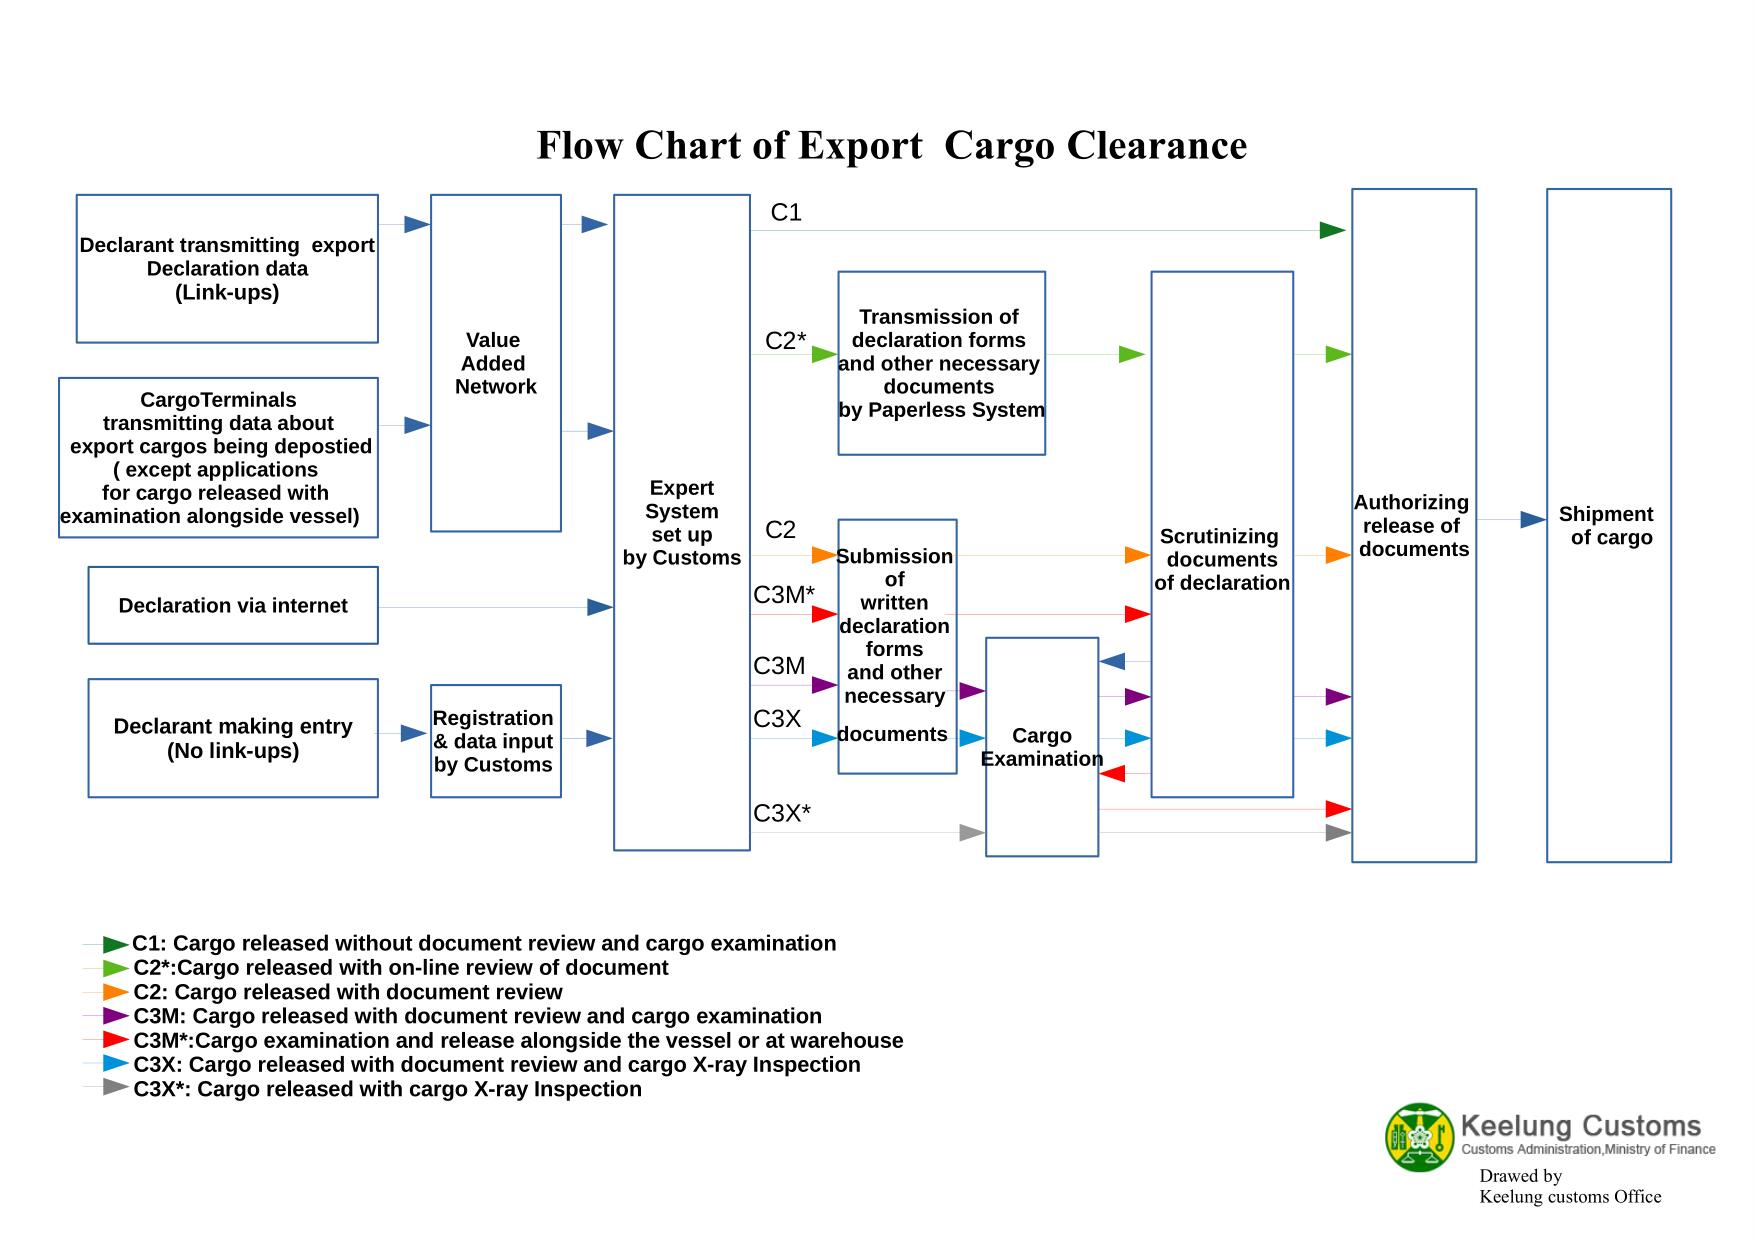 Flow Chart of Export Cargo Clearance